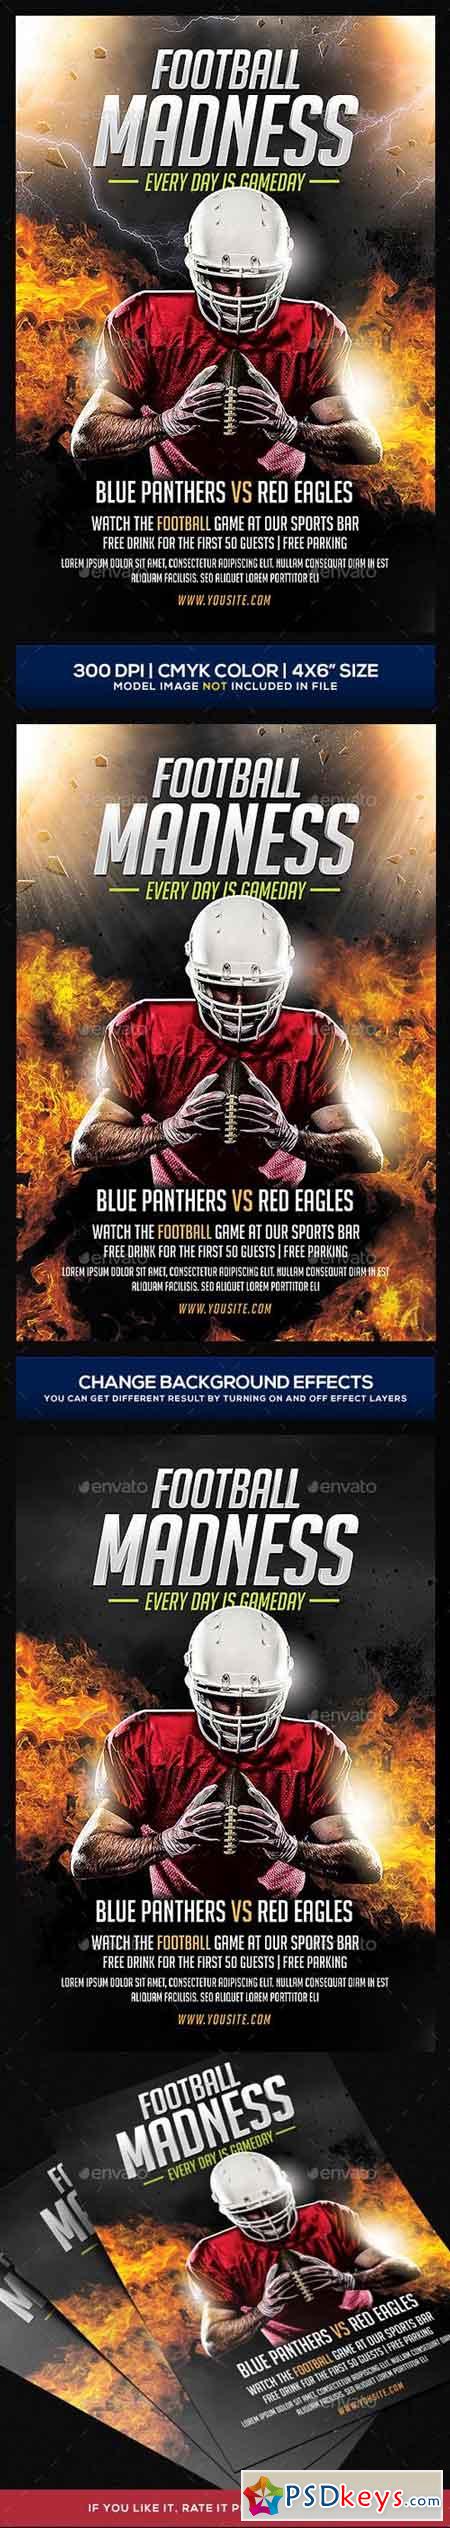 Football Madness Flyer Template 20519523